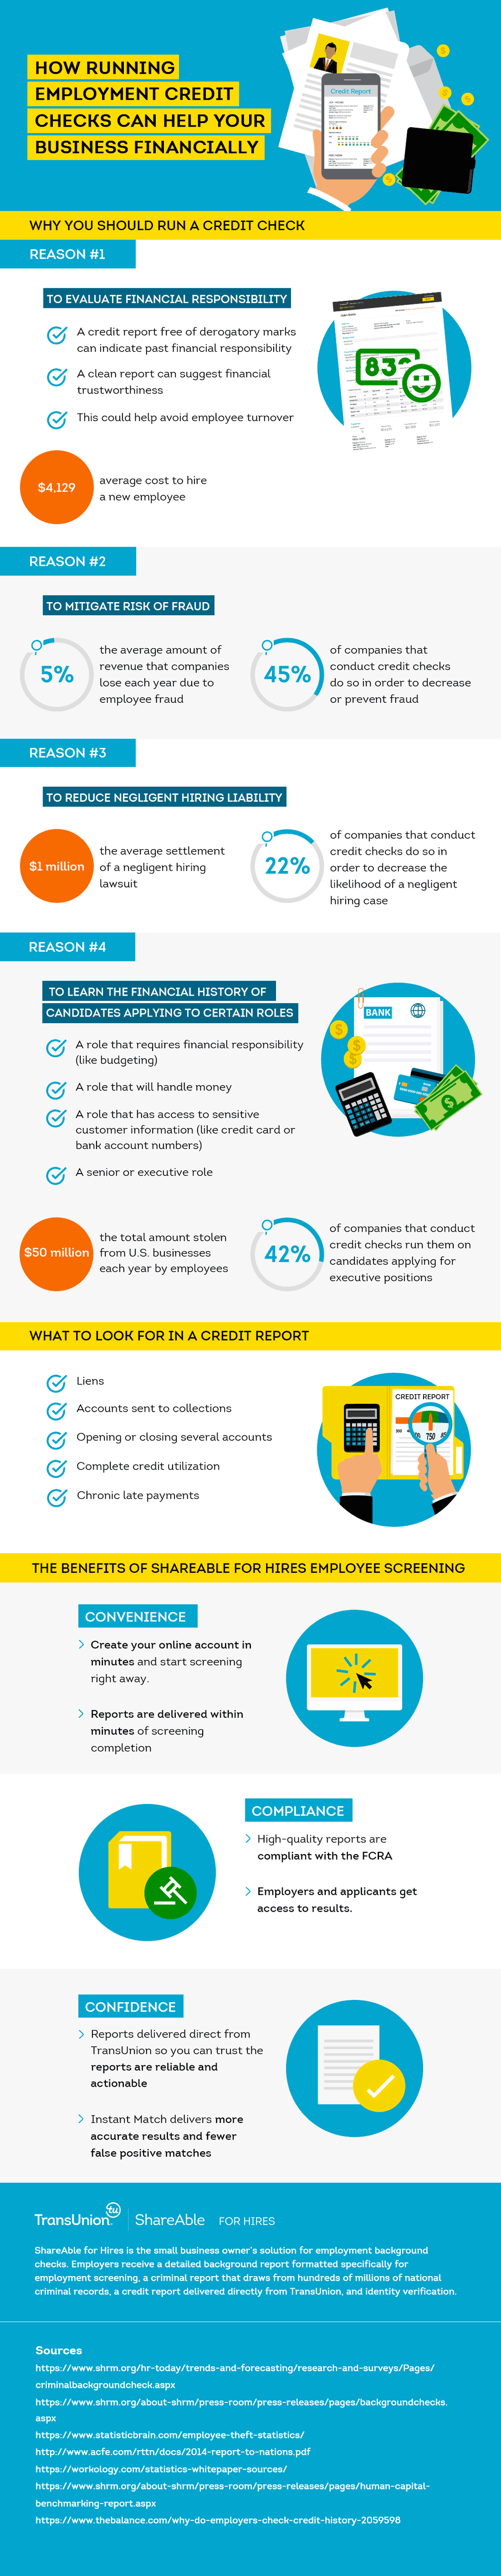 4 Reasons Why To Run Employment Credit Checks  [INFOGRAPHIC]